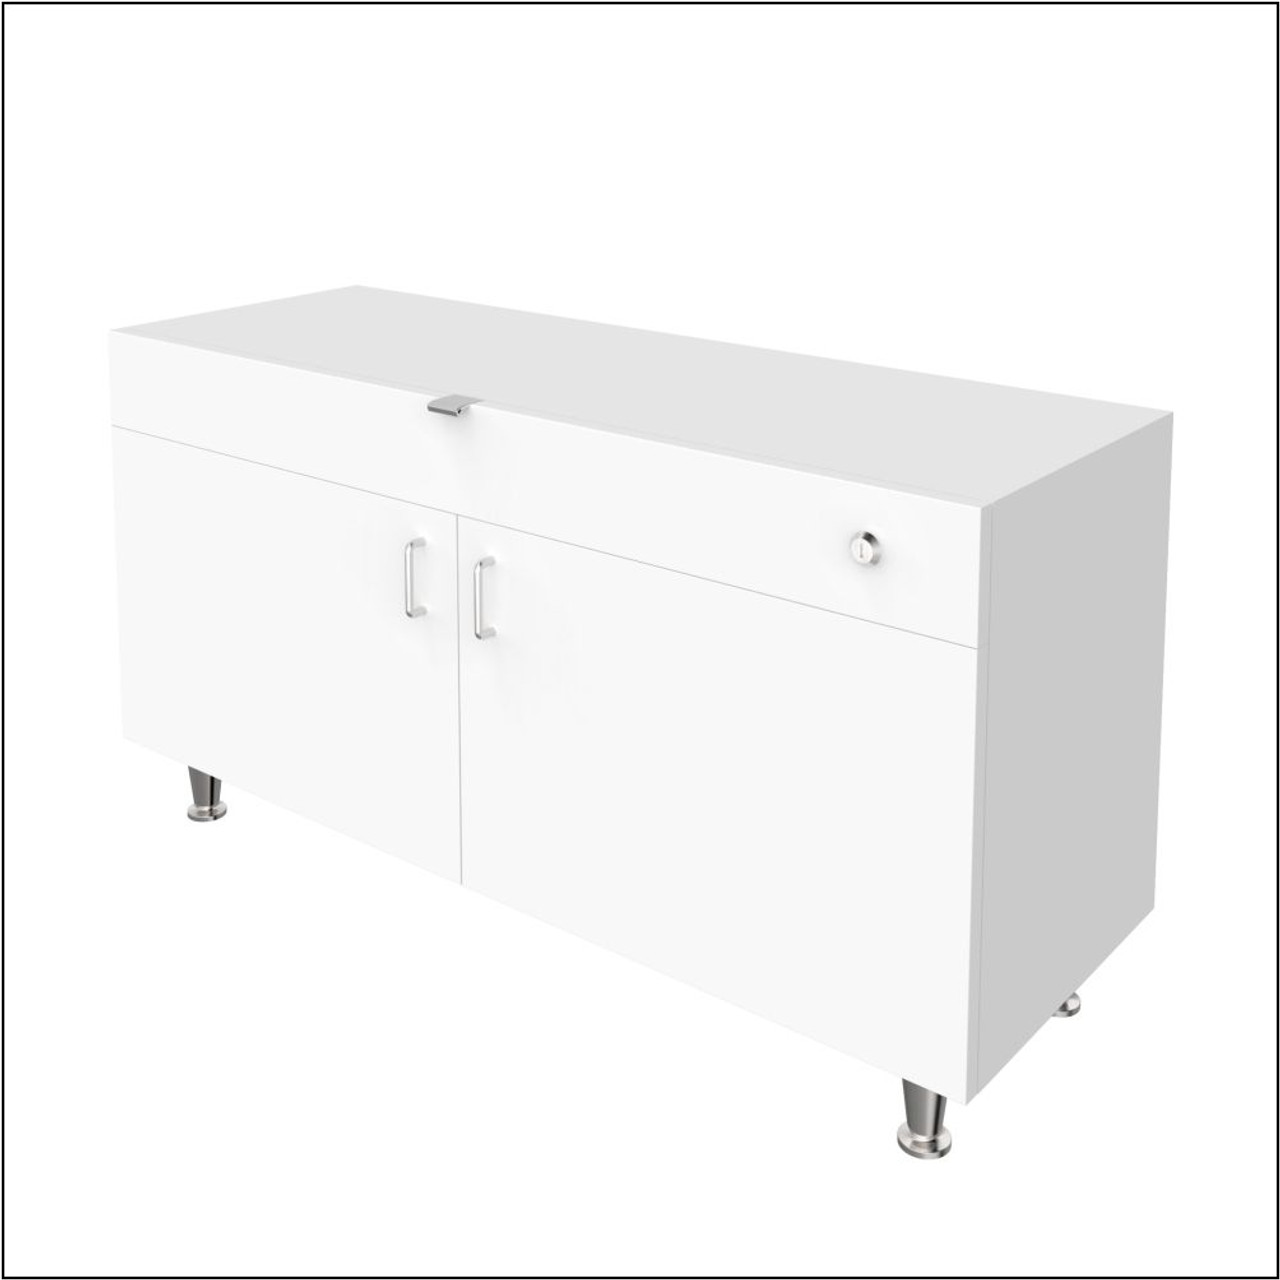 Pullout Cabinet Storage Drawer 25-1/16 Wide